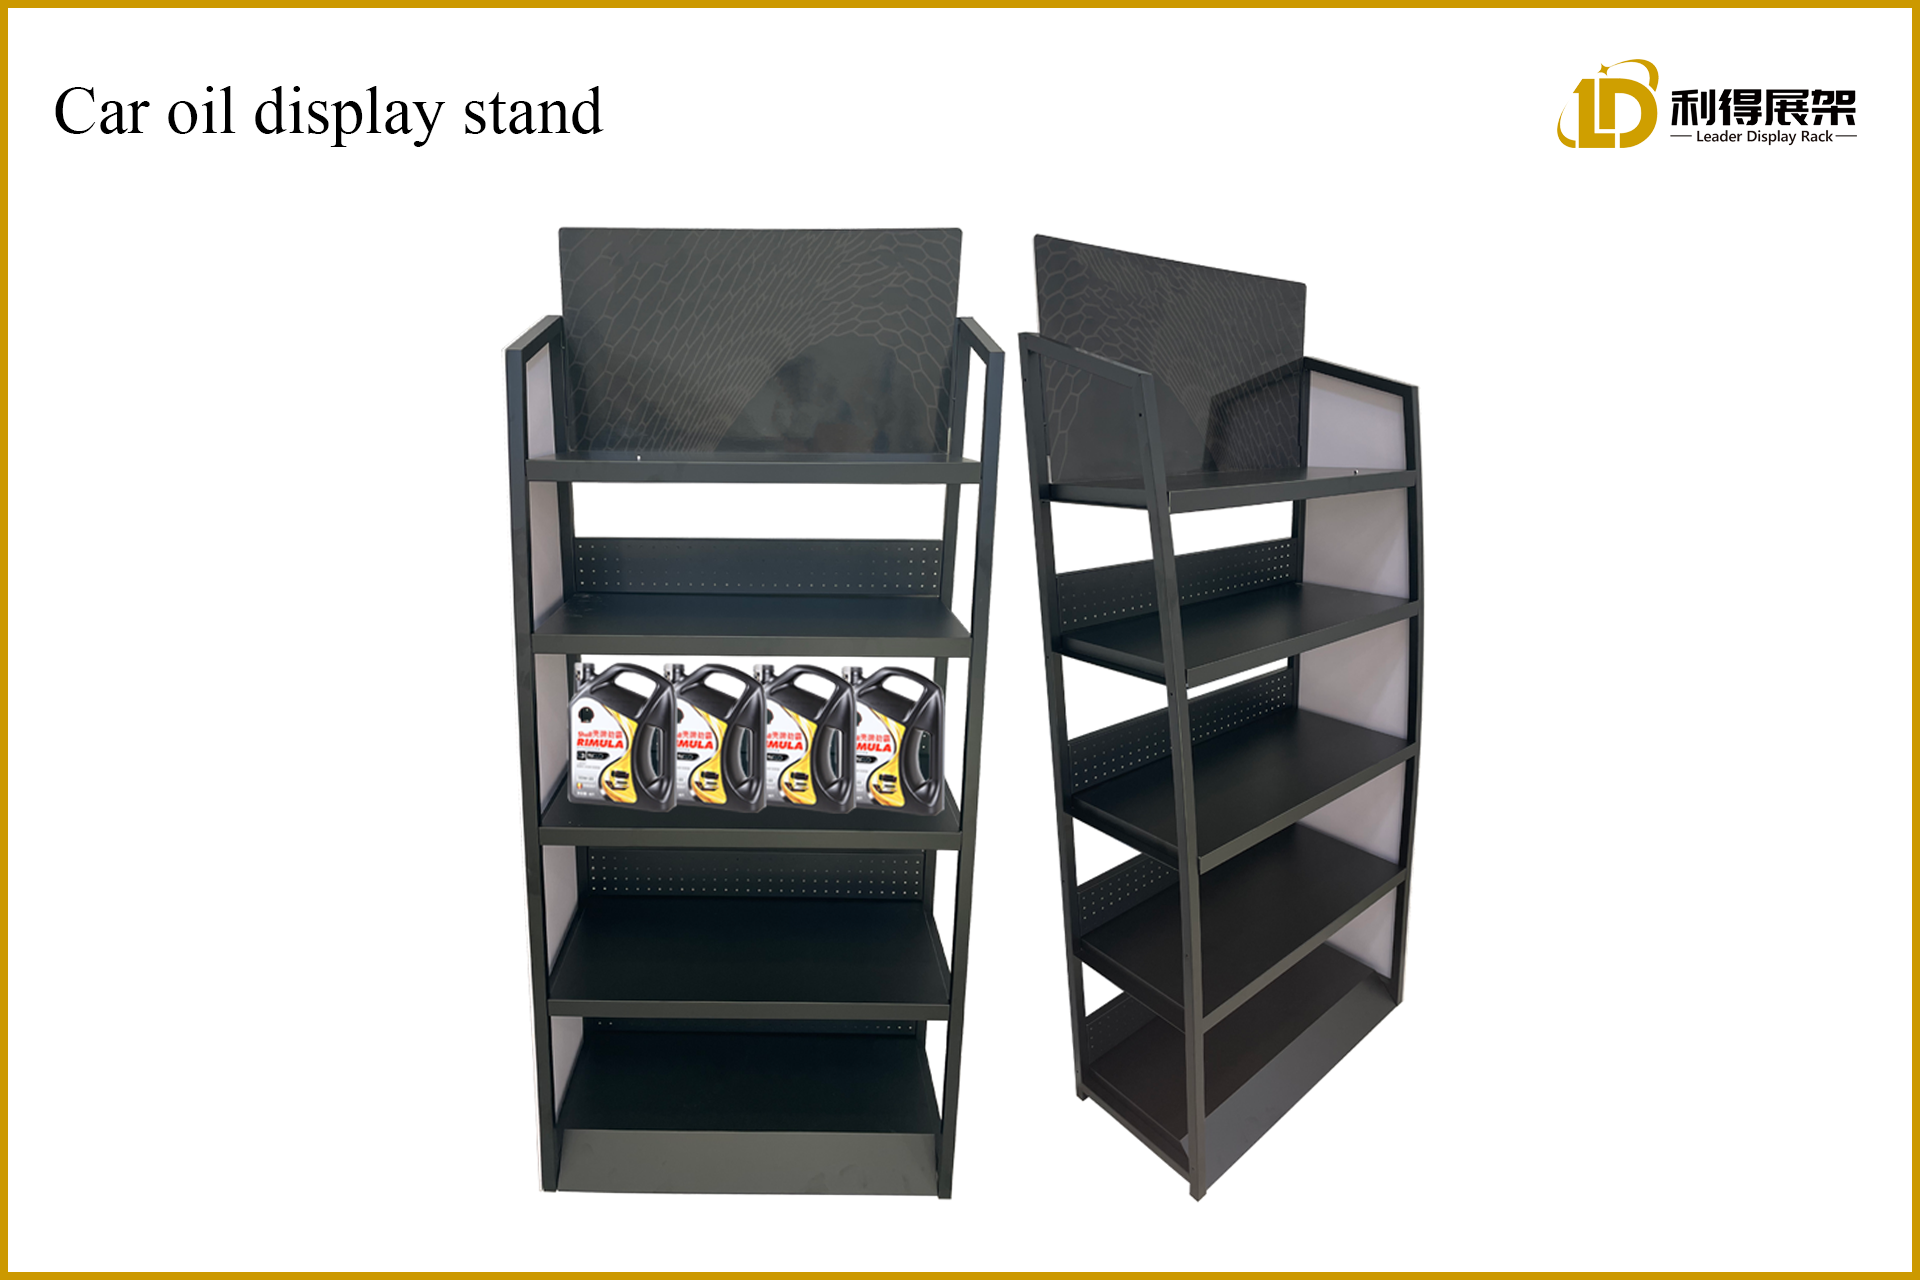 Car oil display stand